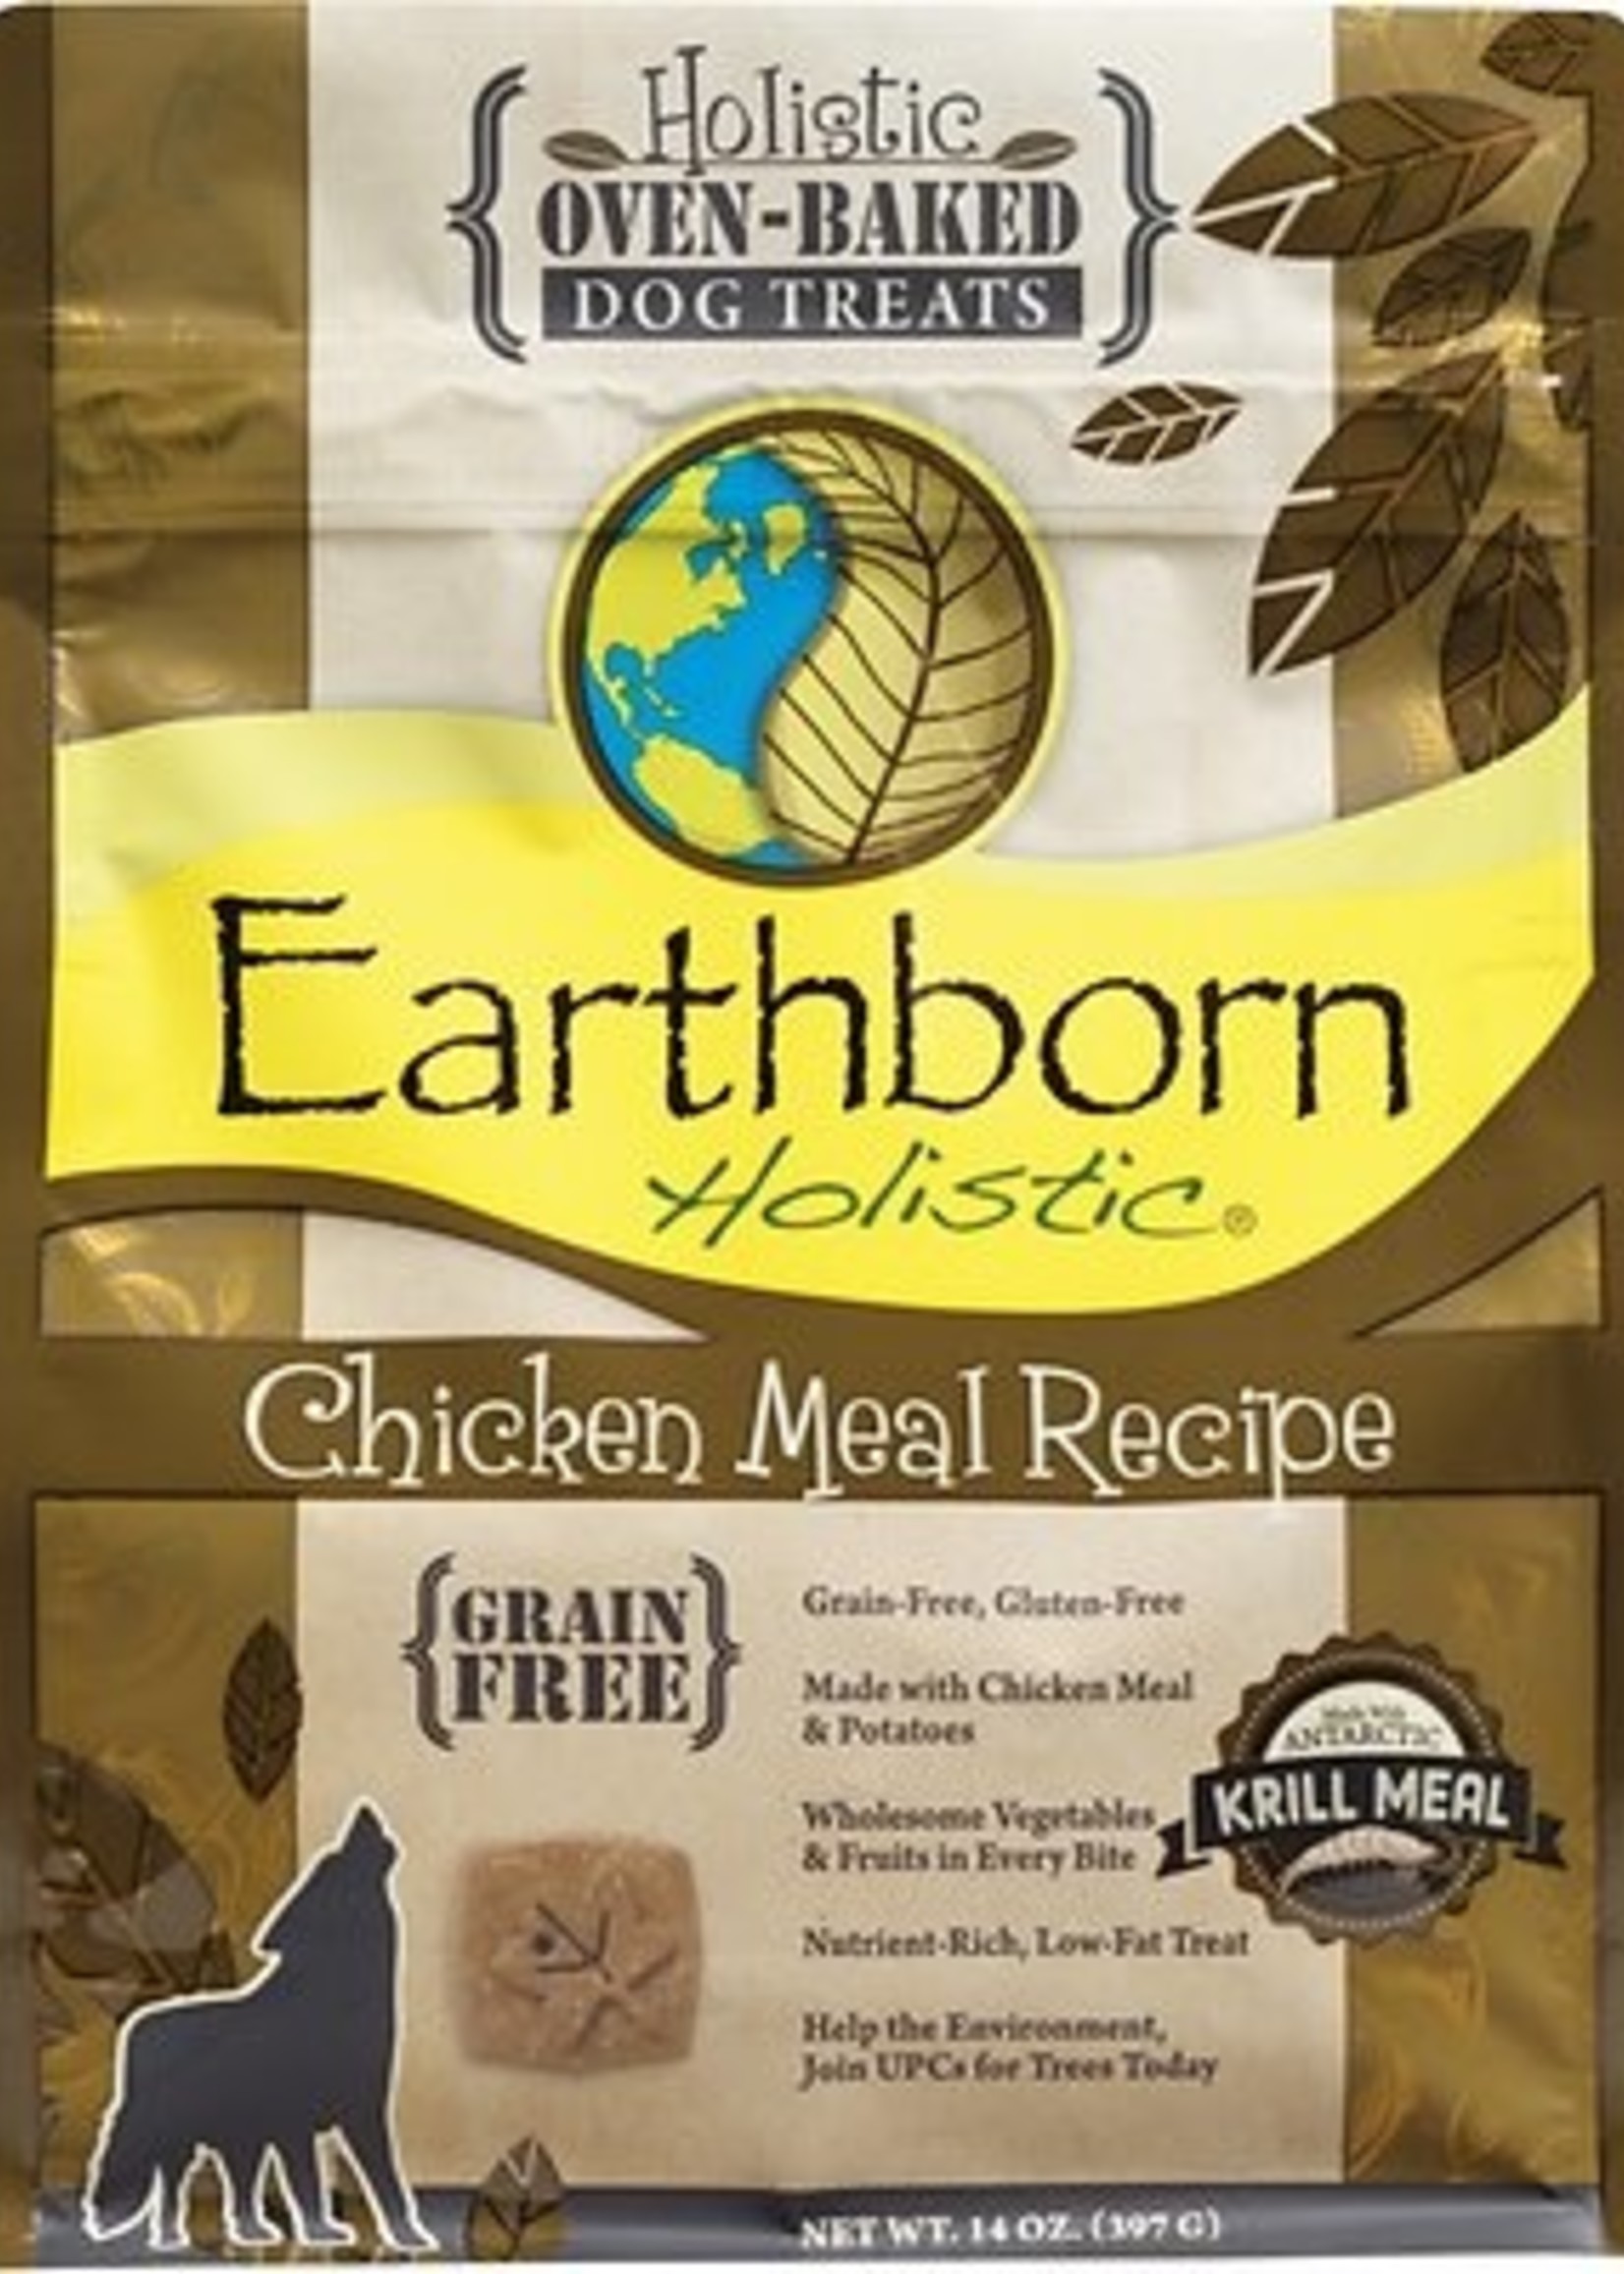 Midwestern Pet Earthborn Chicken Biscuit 2 lb